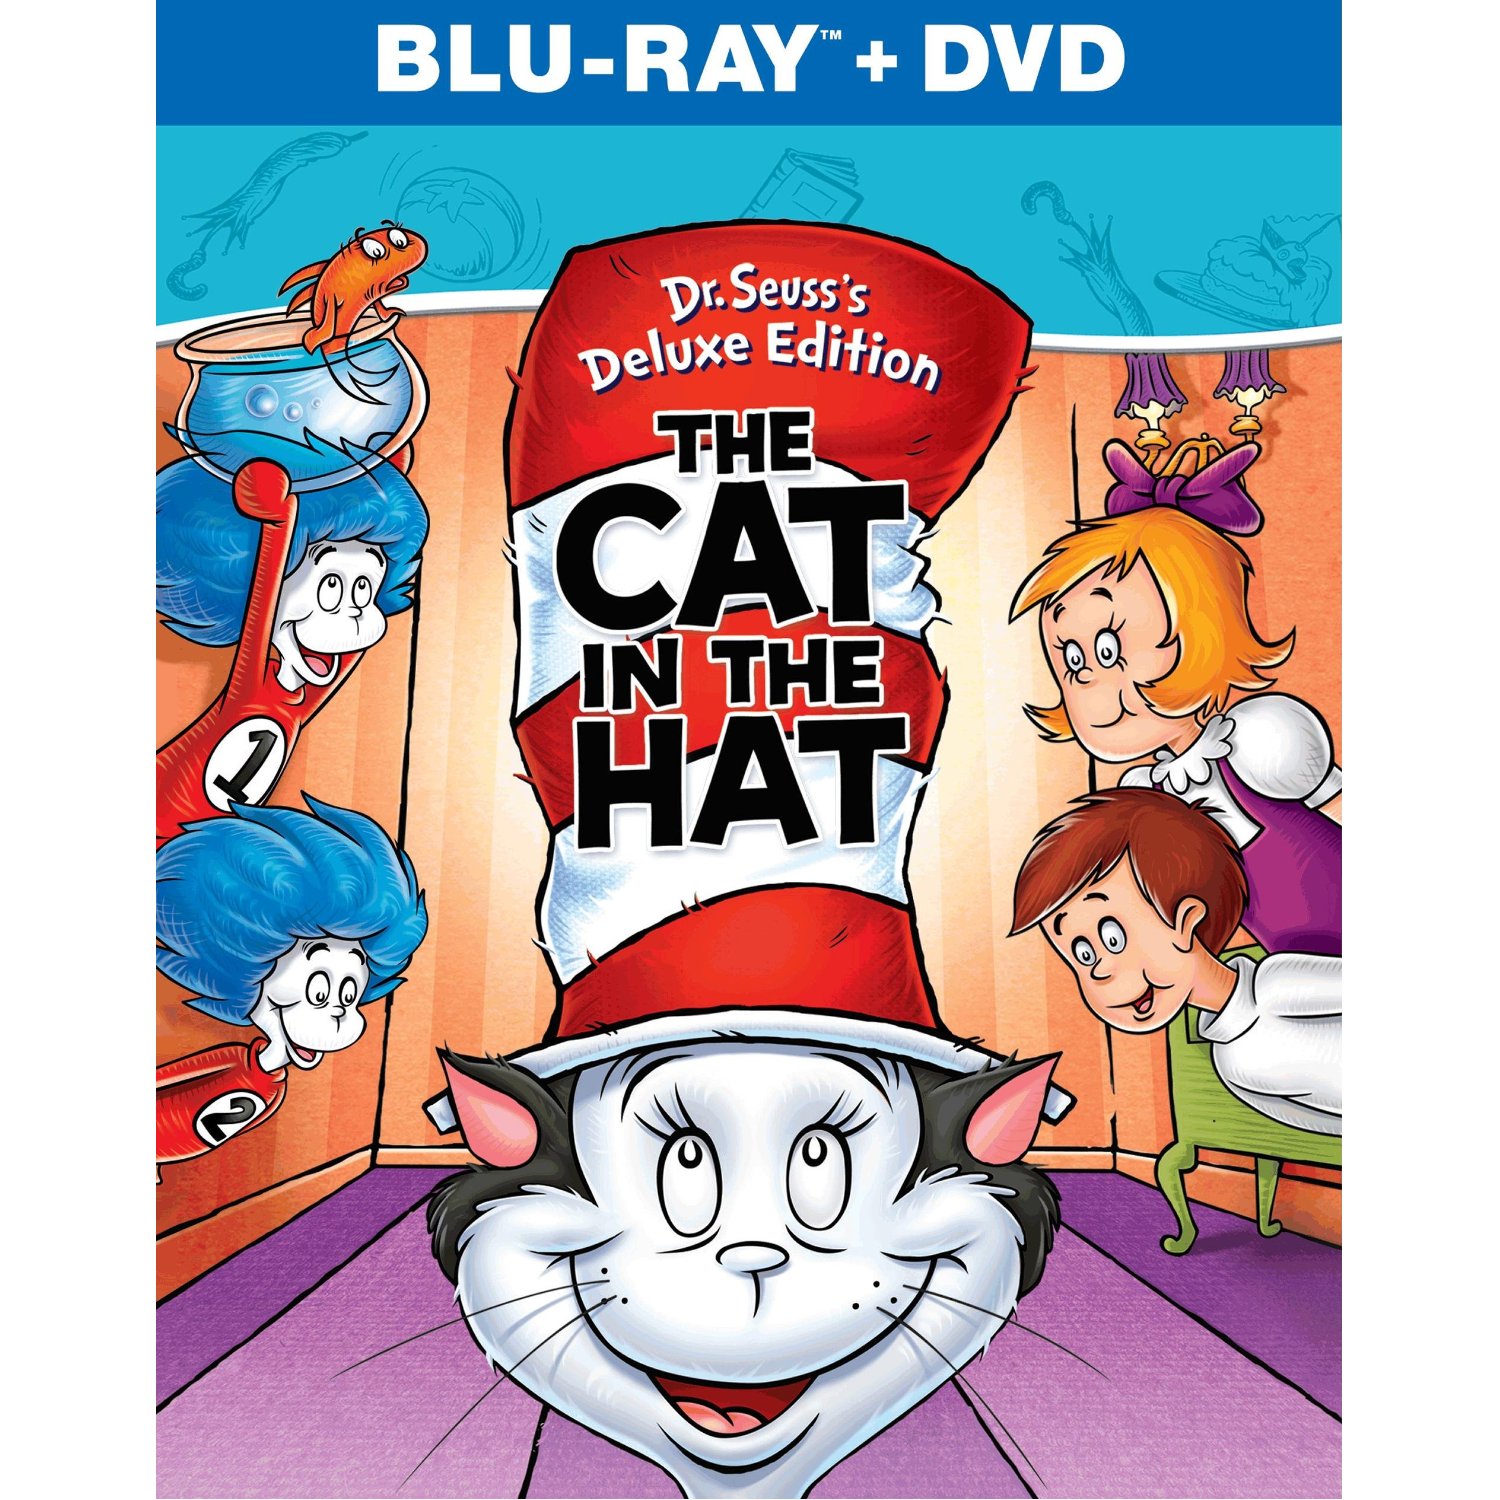 Dr Seusss The Cat In The Hat Available On Dvd And Blu Ray August 7